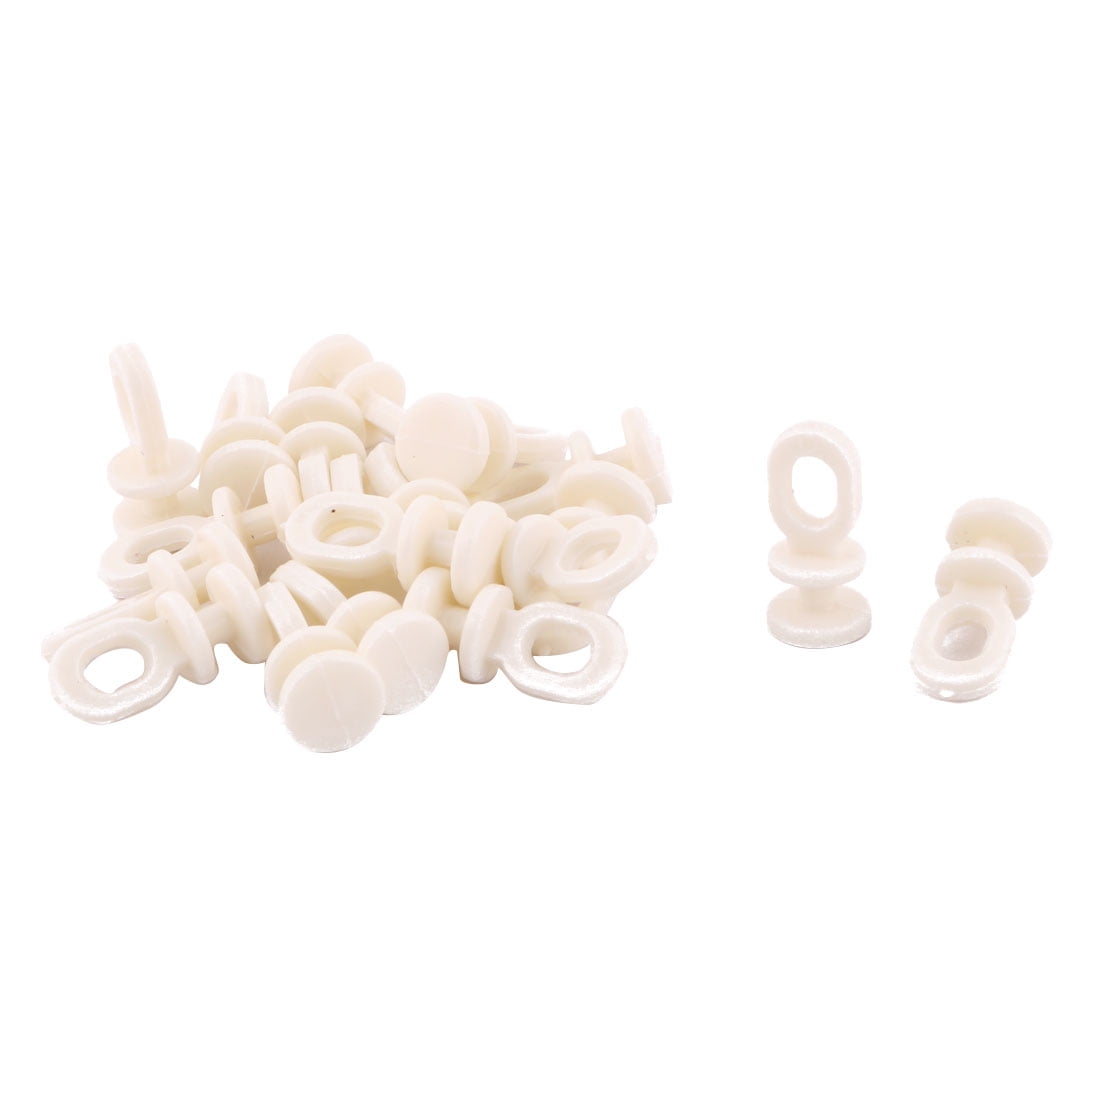 Plastic Curtain Track Rail Carrier Slide Glide Rollers White 23mm Height 60 Pcs 